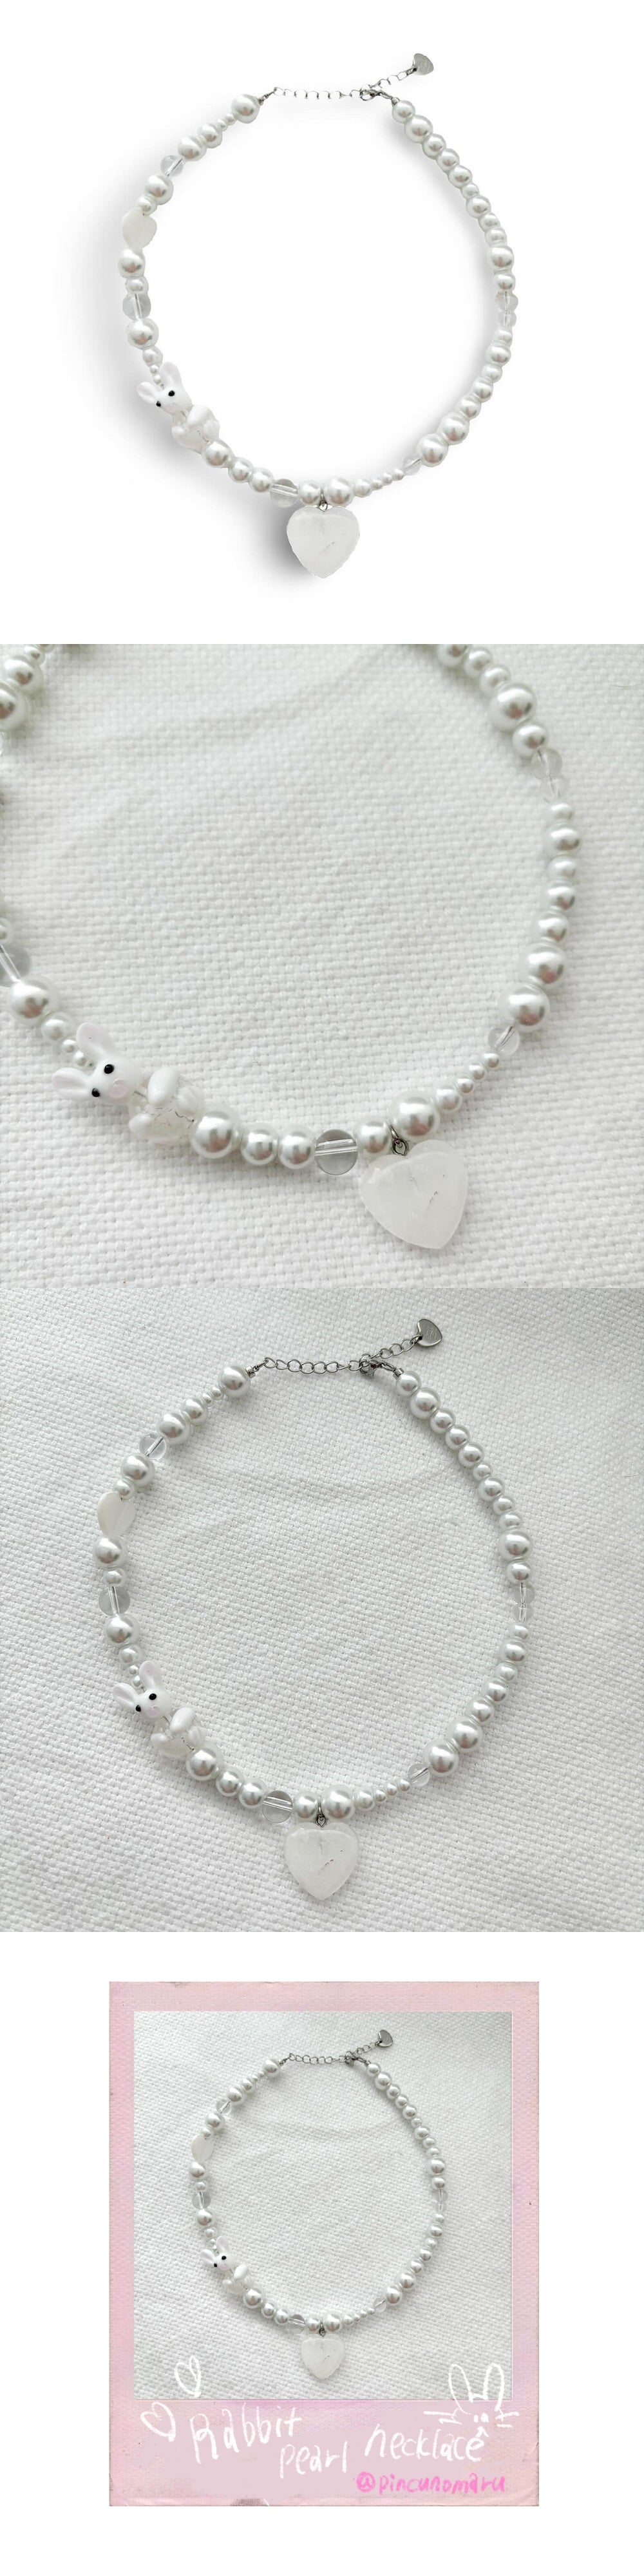 Rabbit pearl necklace